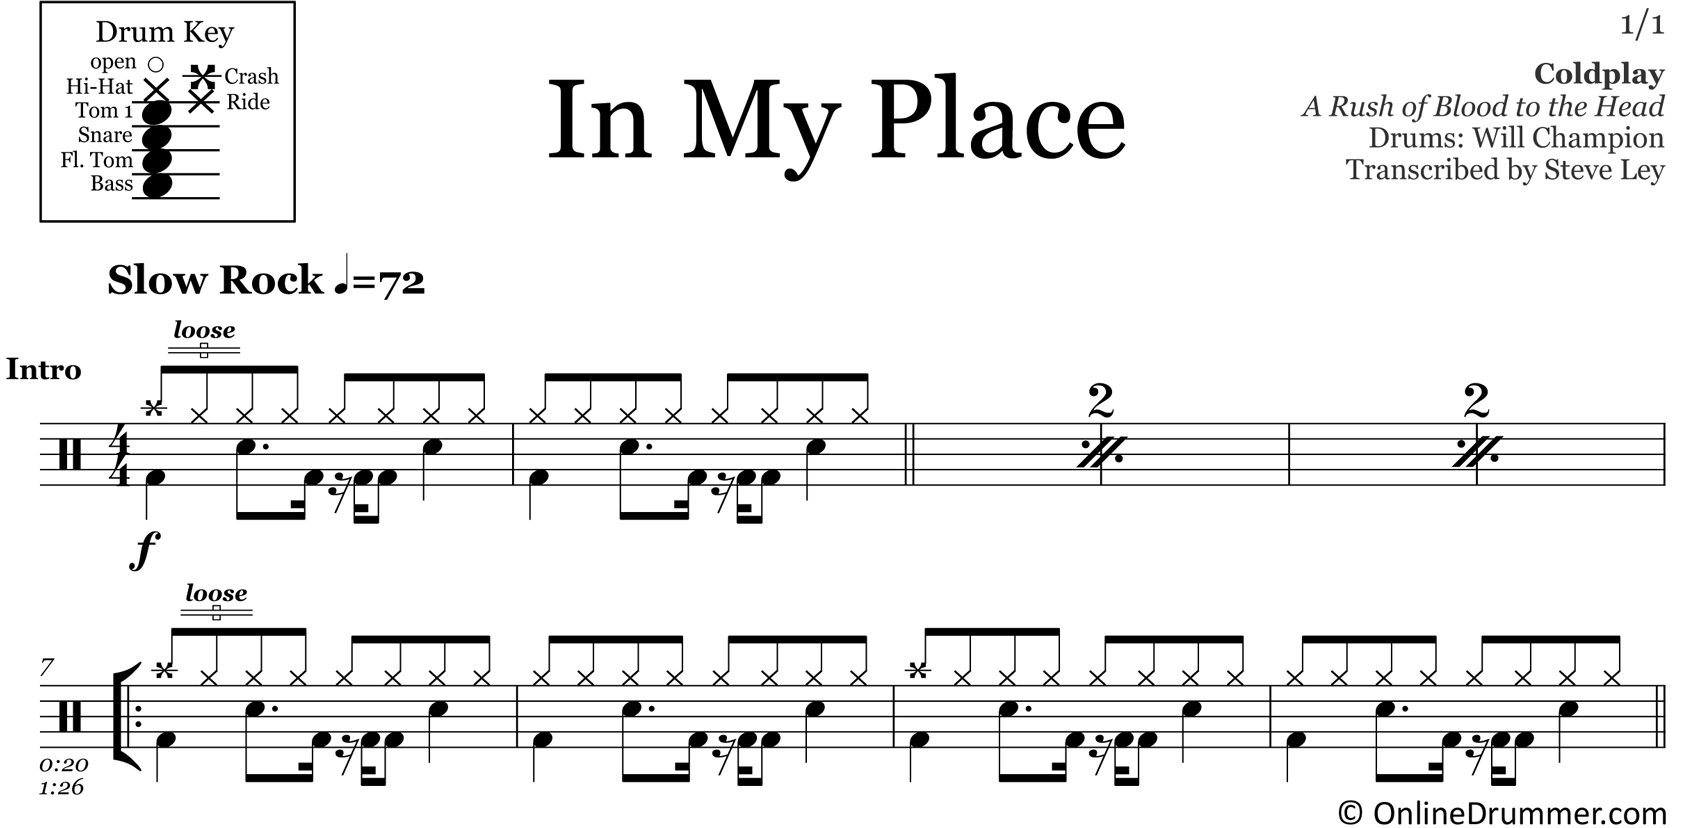 In My Place - Coldplay - Drum Sheet Music